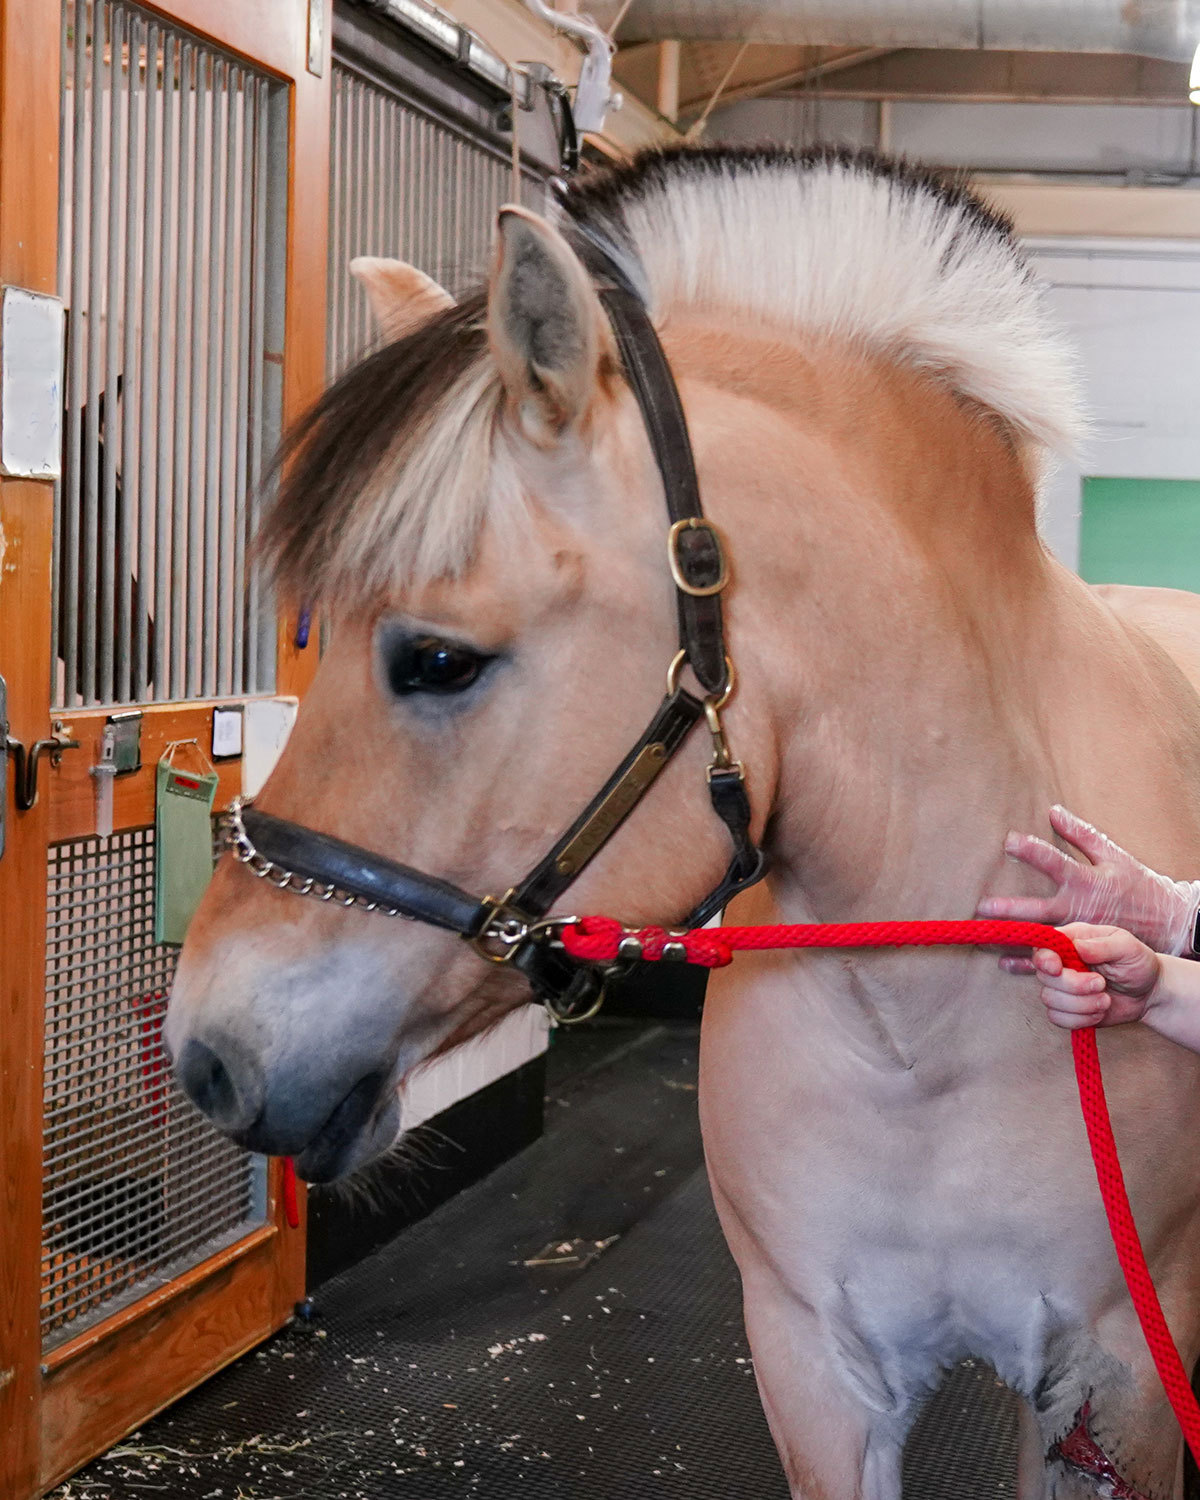 A Norwegian Fjord gelding with a brown coat and white and black mane, standing in the Cornell Equine Hospital